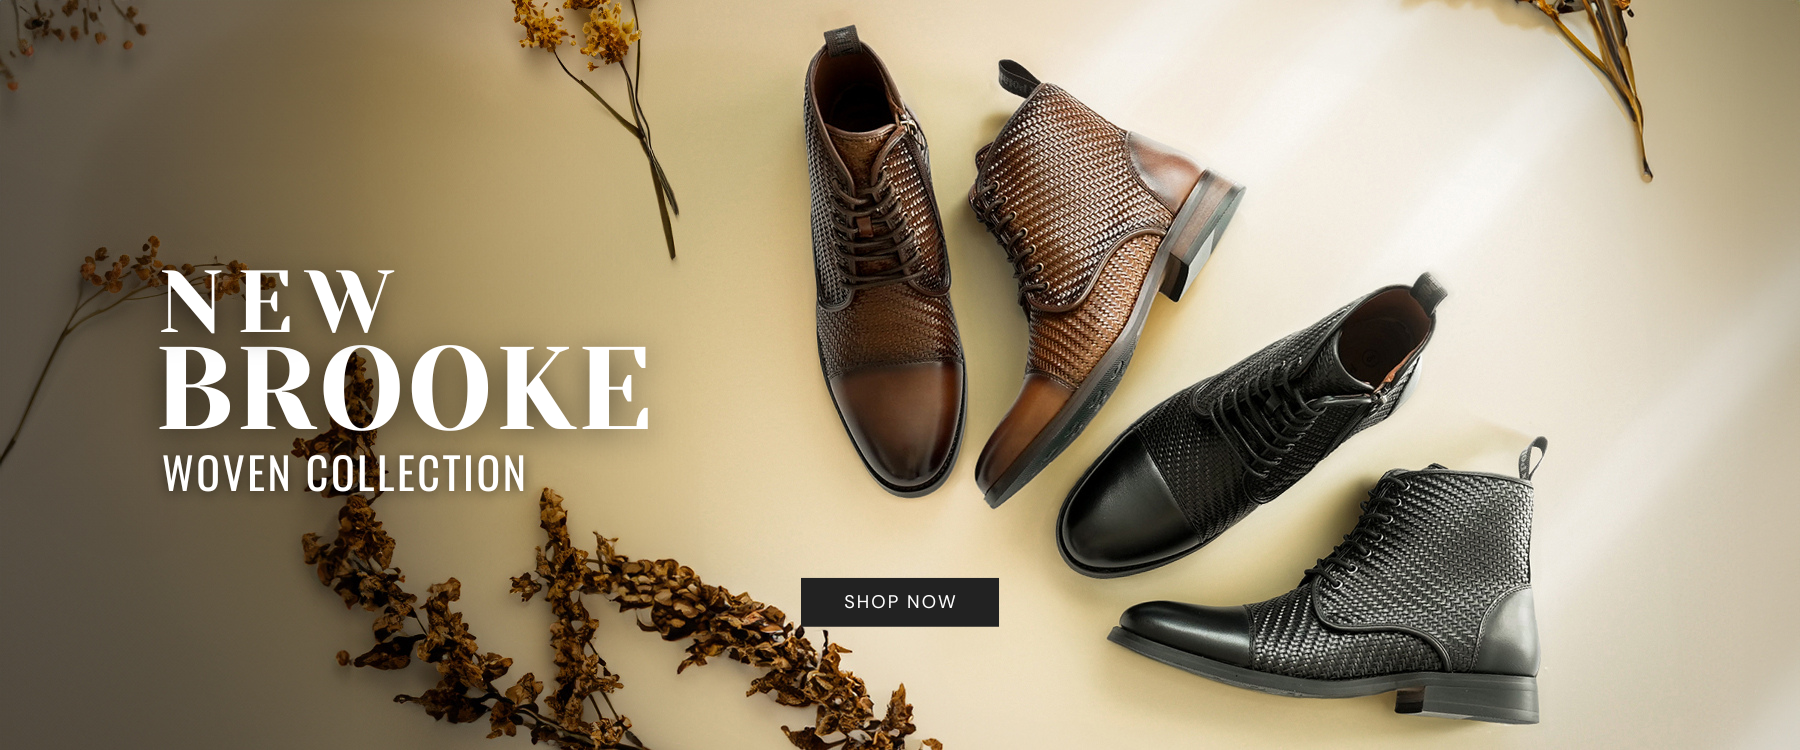 Trendy Woven Boots For All Season | Brooke Boots | Polar Fox by Conal Footwear